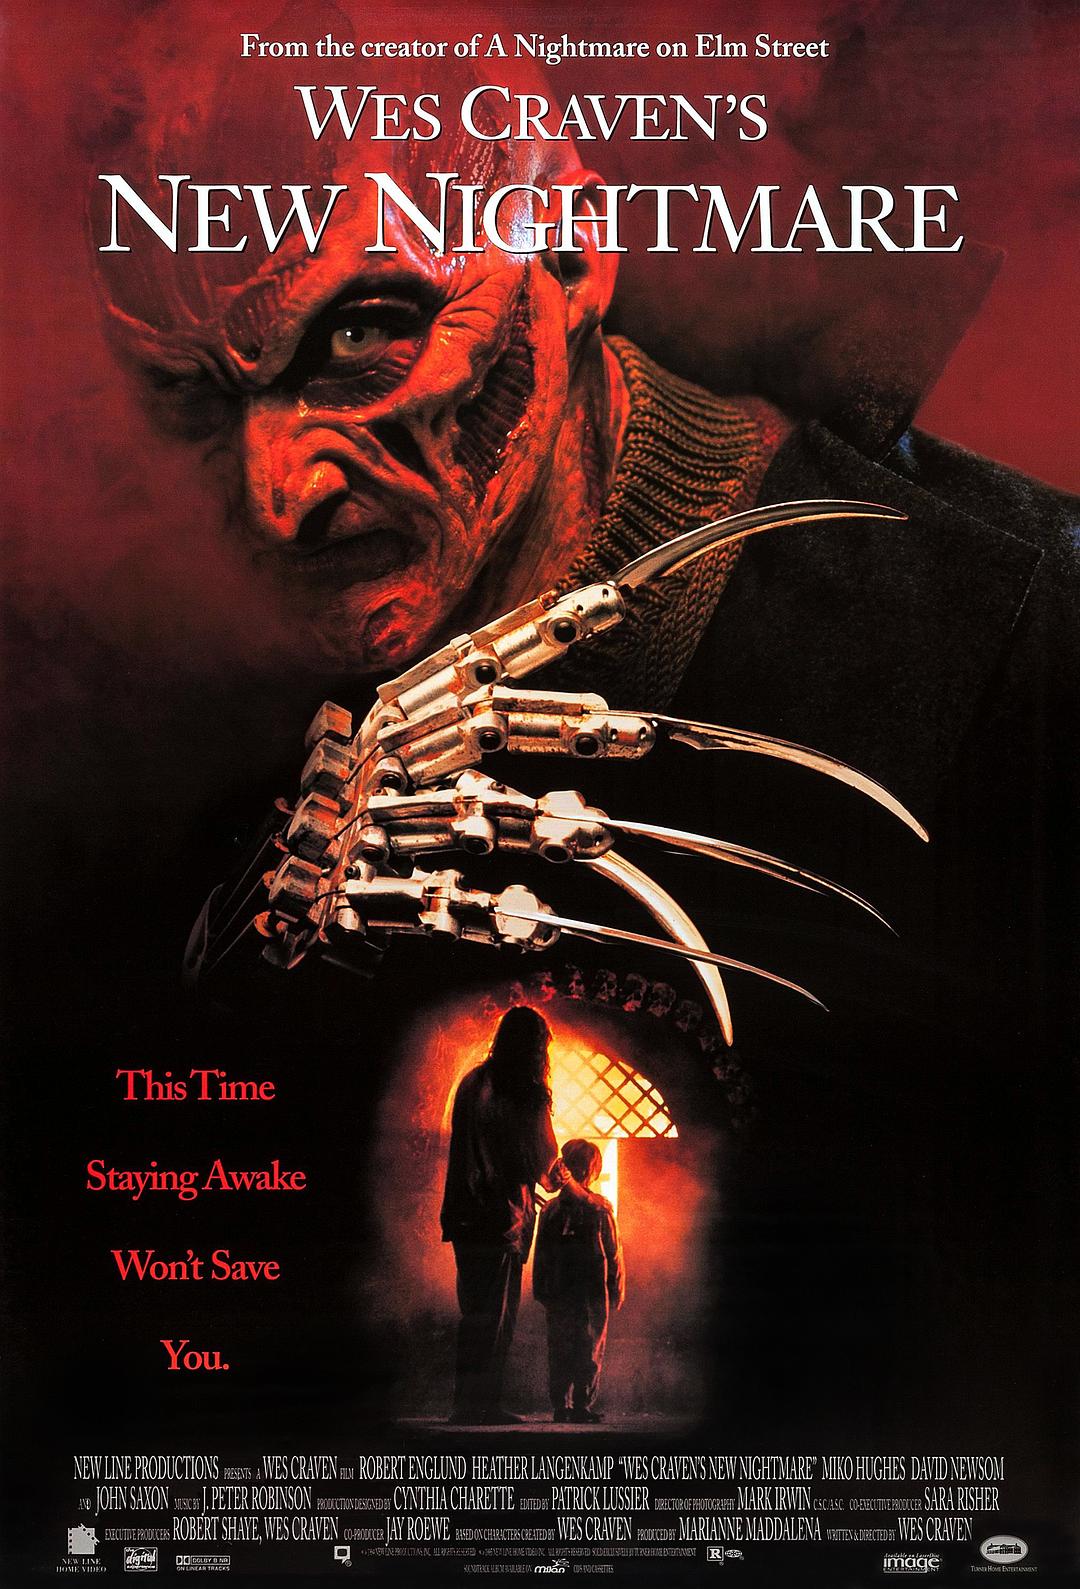 ͹7 Wes.Cravens.New.Nightmare.1994.1080p.BluRay.x264-MOOVEE 8.73GB-1.png